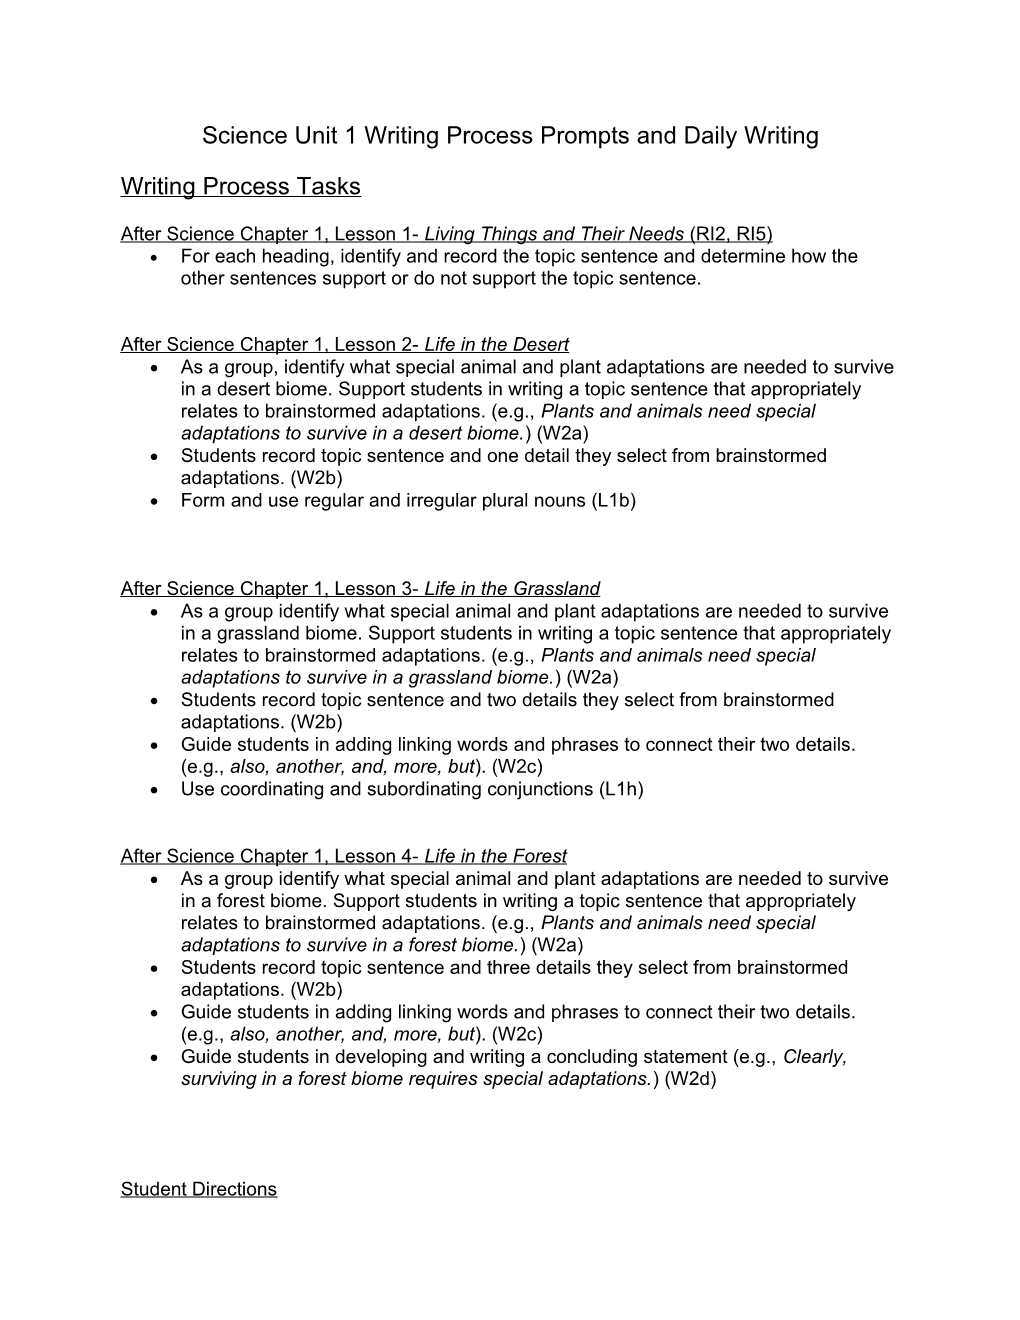 Science Unit 1 Writing Process Prompts and Daily Writing